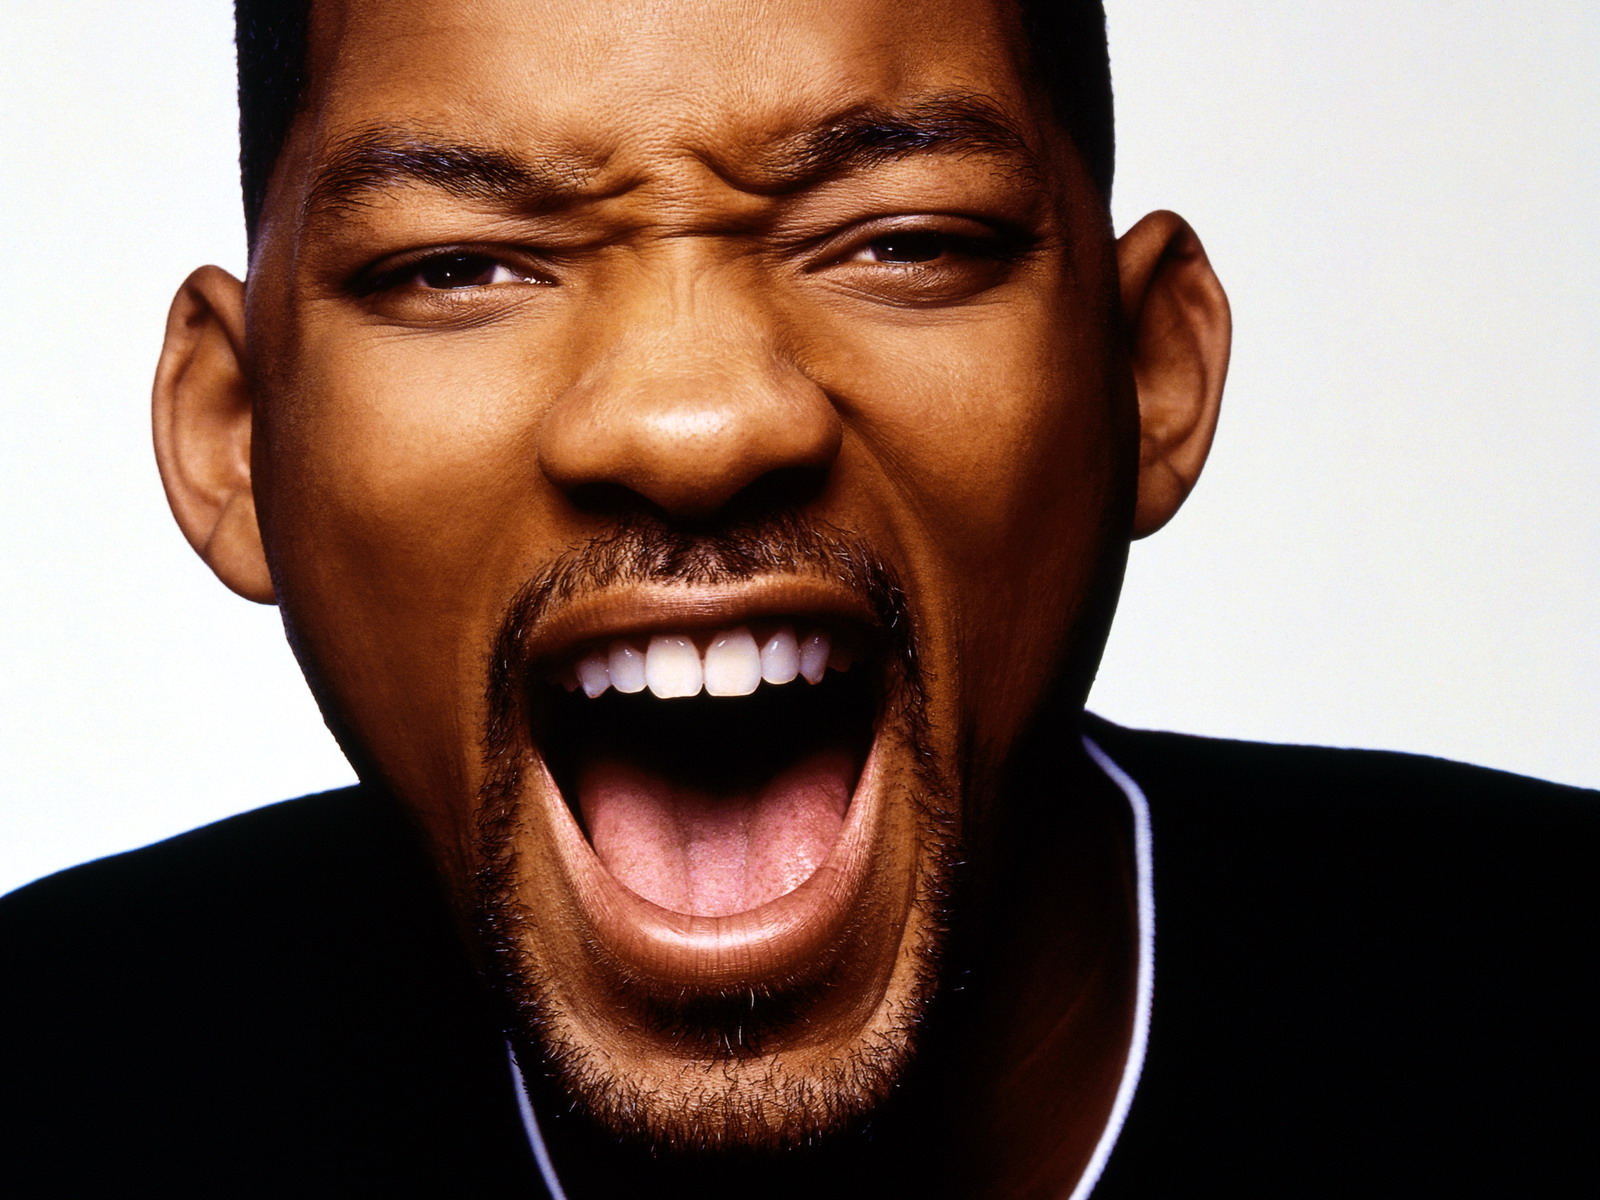 Will Smith is Back On the Music Scene with “Fiesta” (Remix)